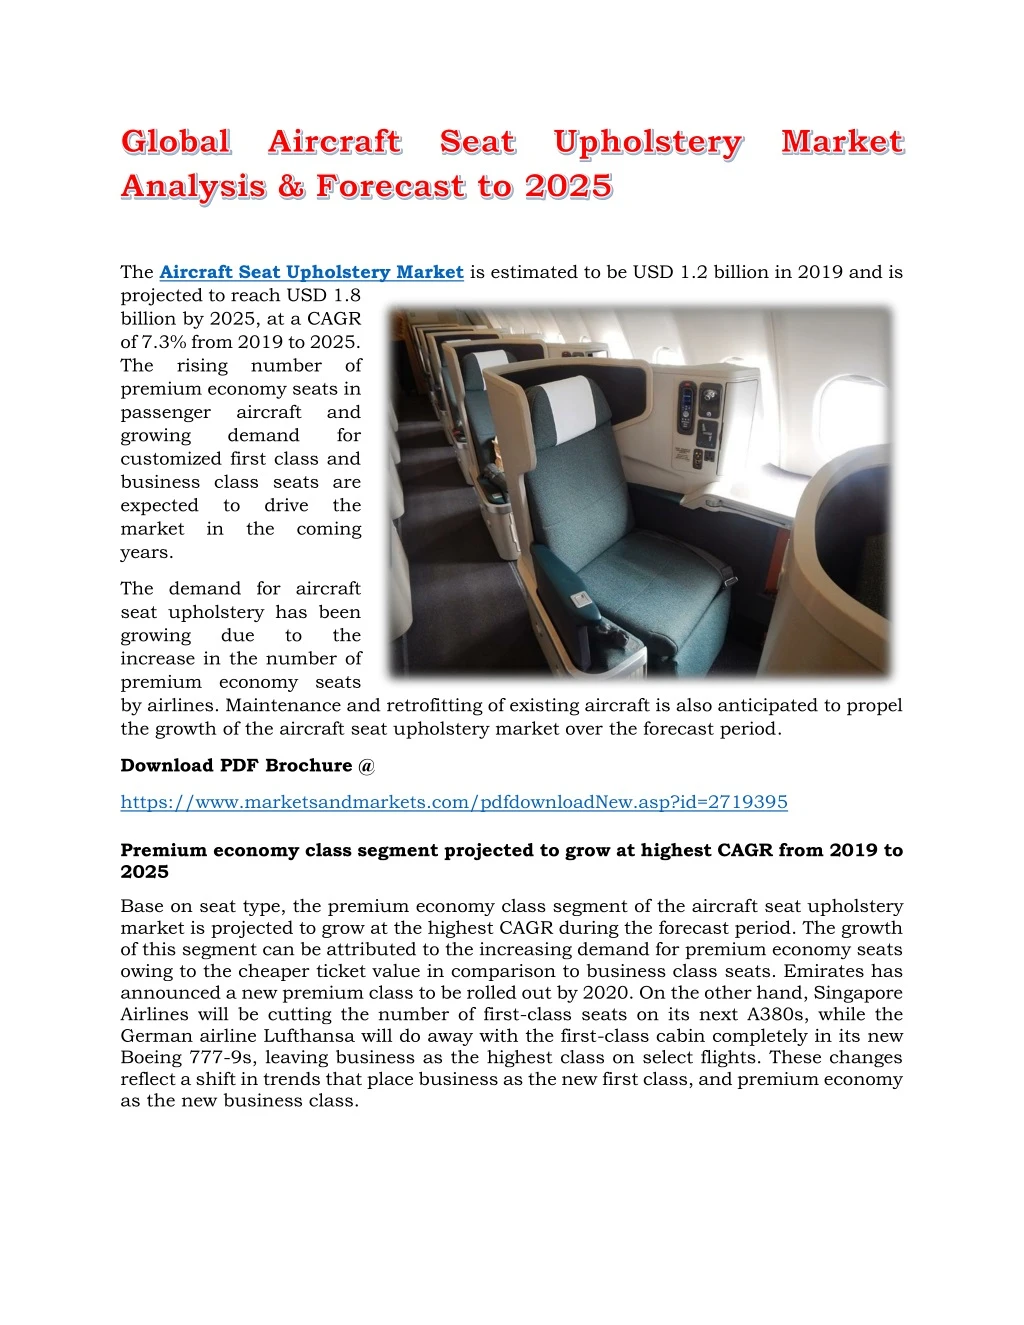 the aircraft seat upholstery market is estimated